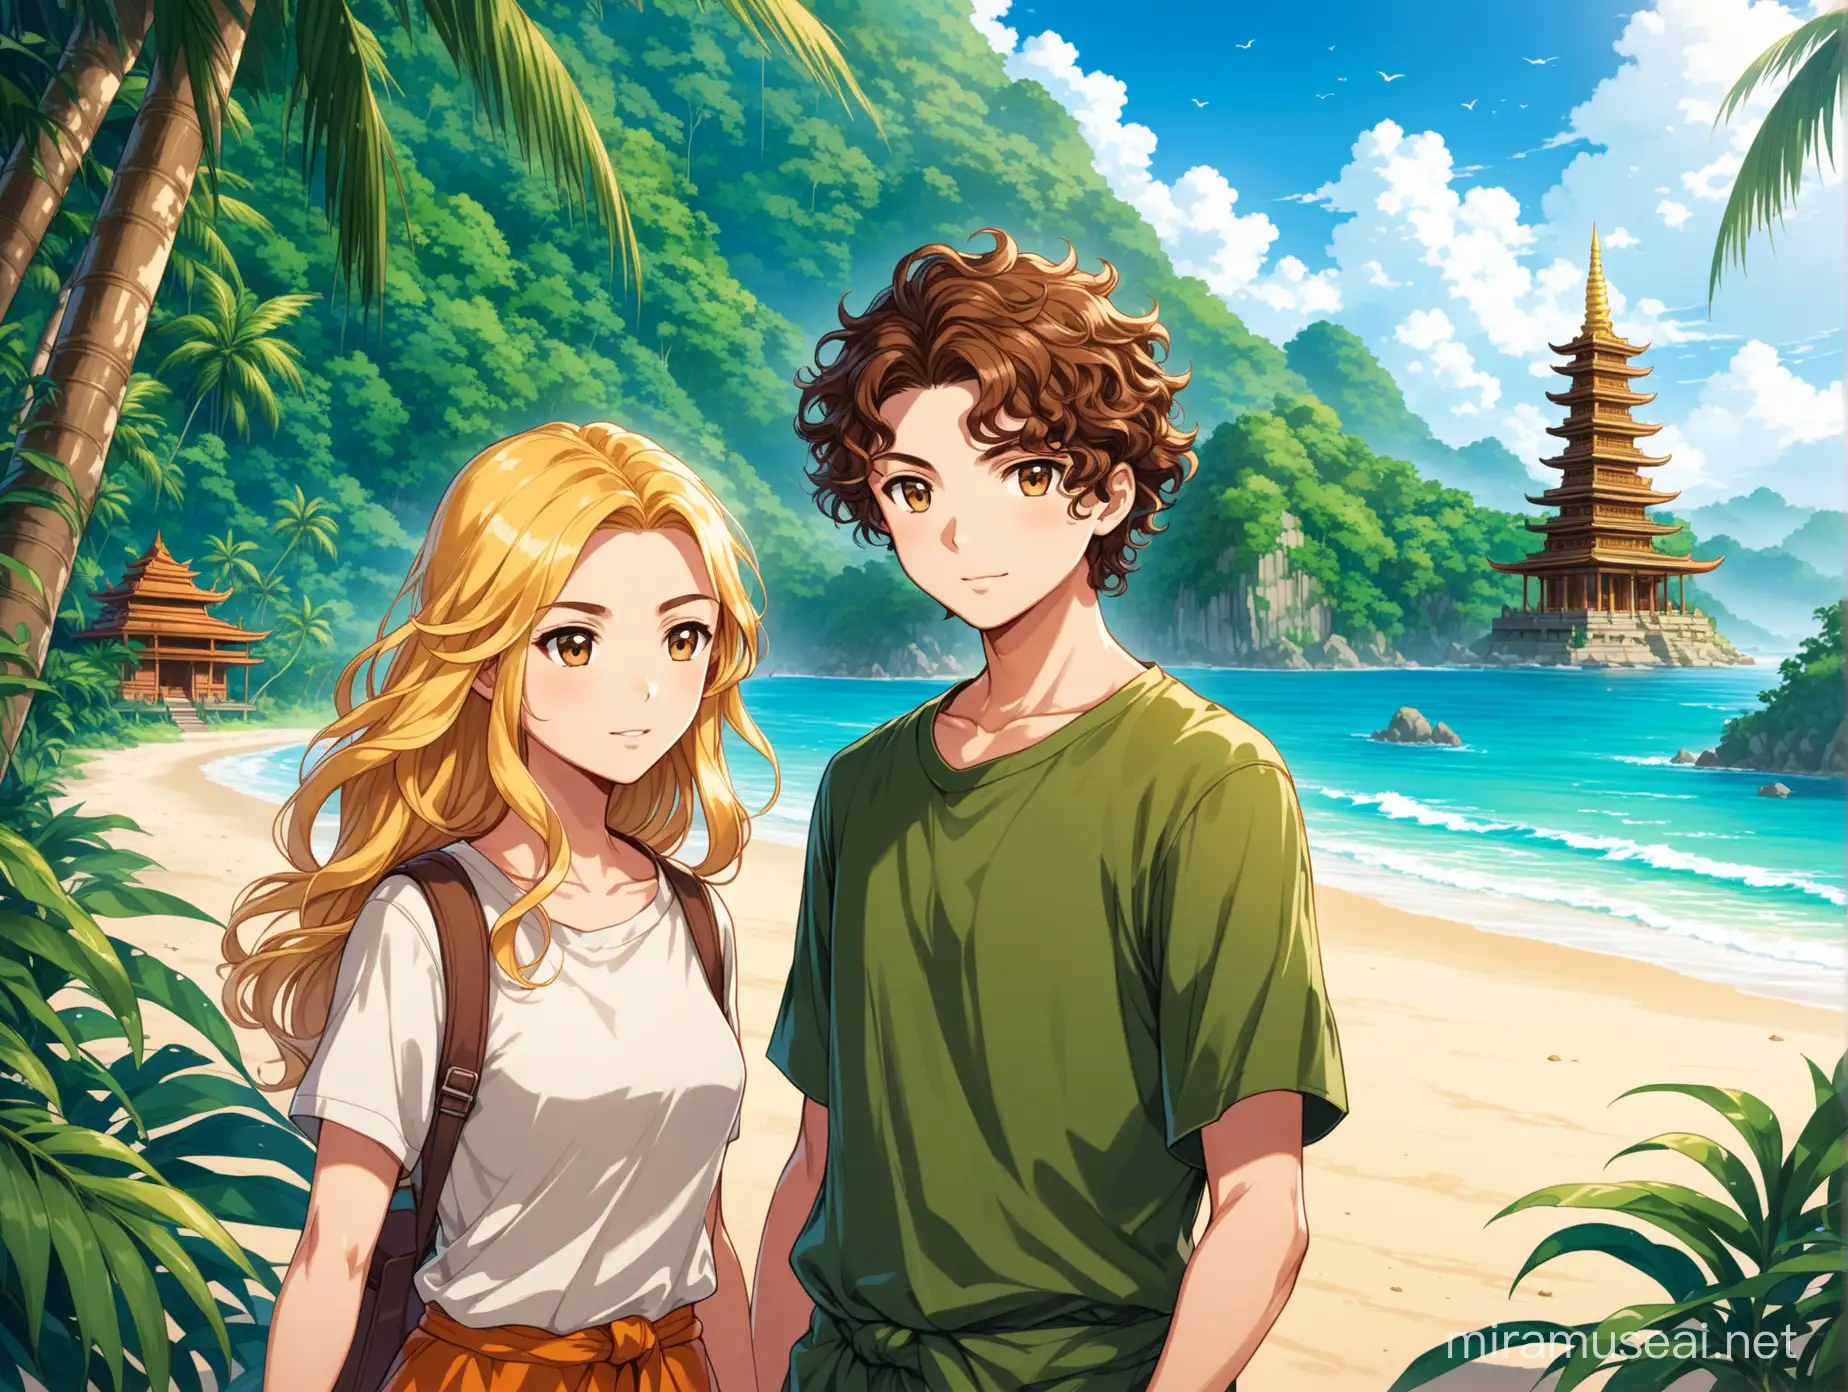 Young boy with brown curly hair, young girl with long blond hair, travelling outfits, South East Asian jungle, beach, ancient Buddhist temple in the background, anime style